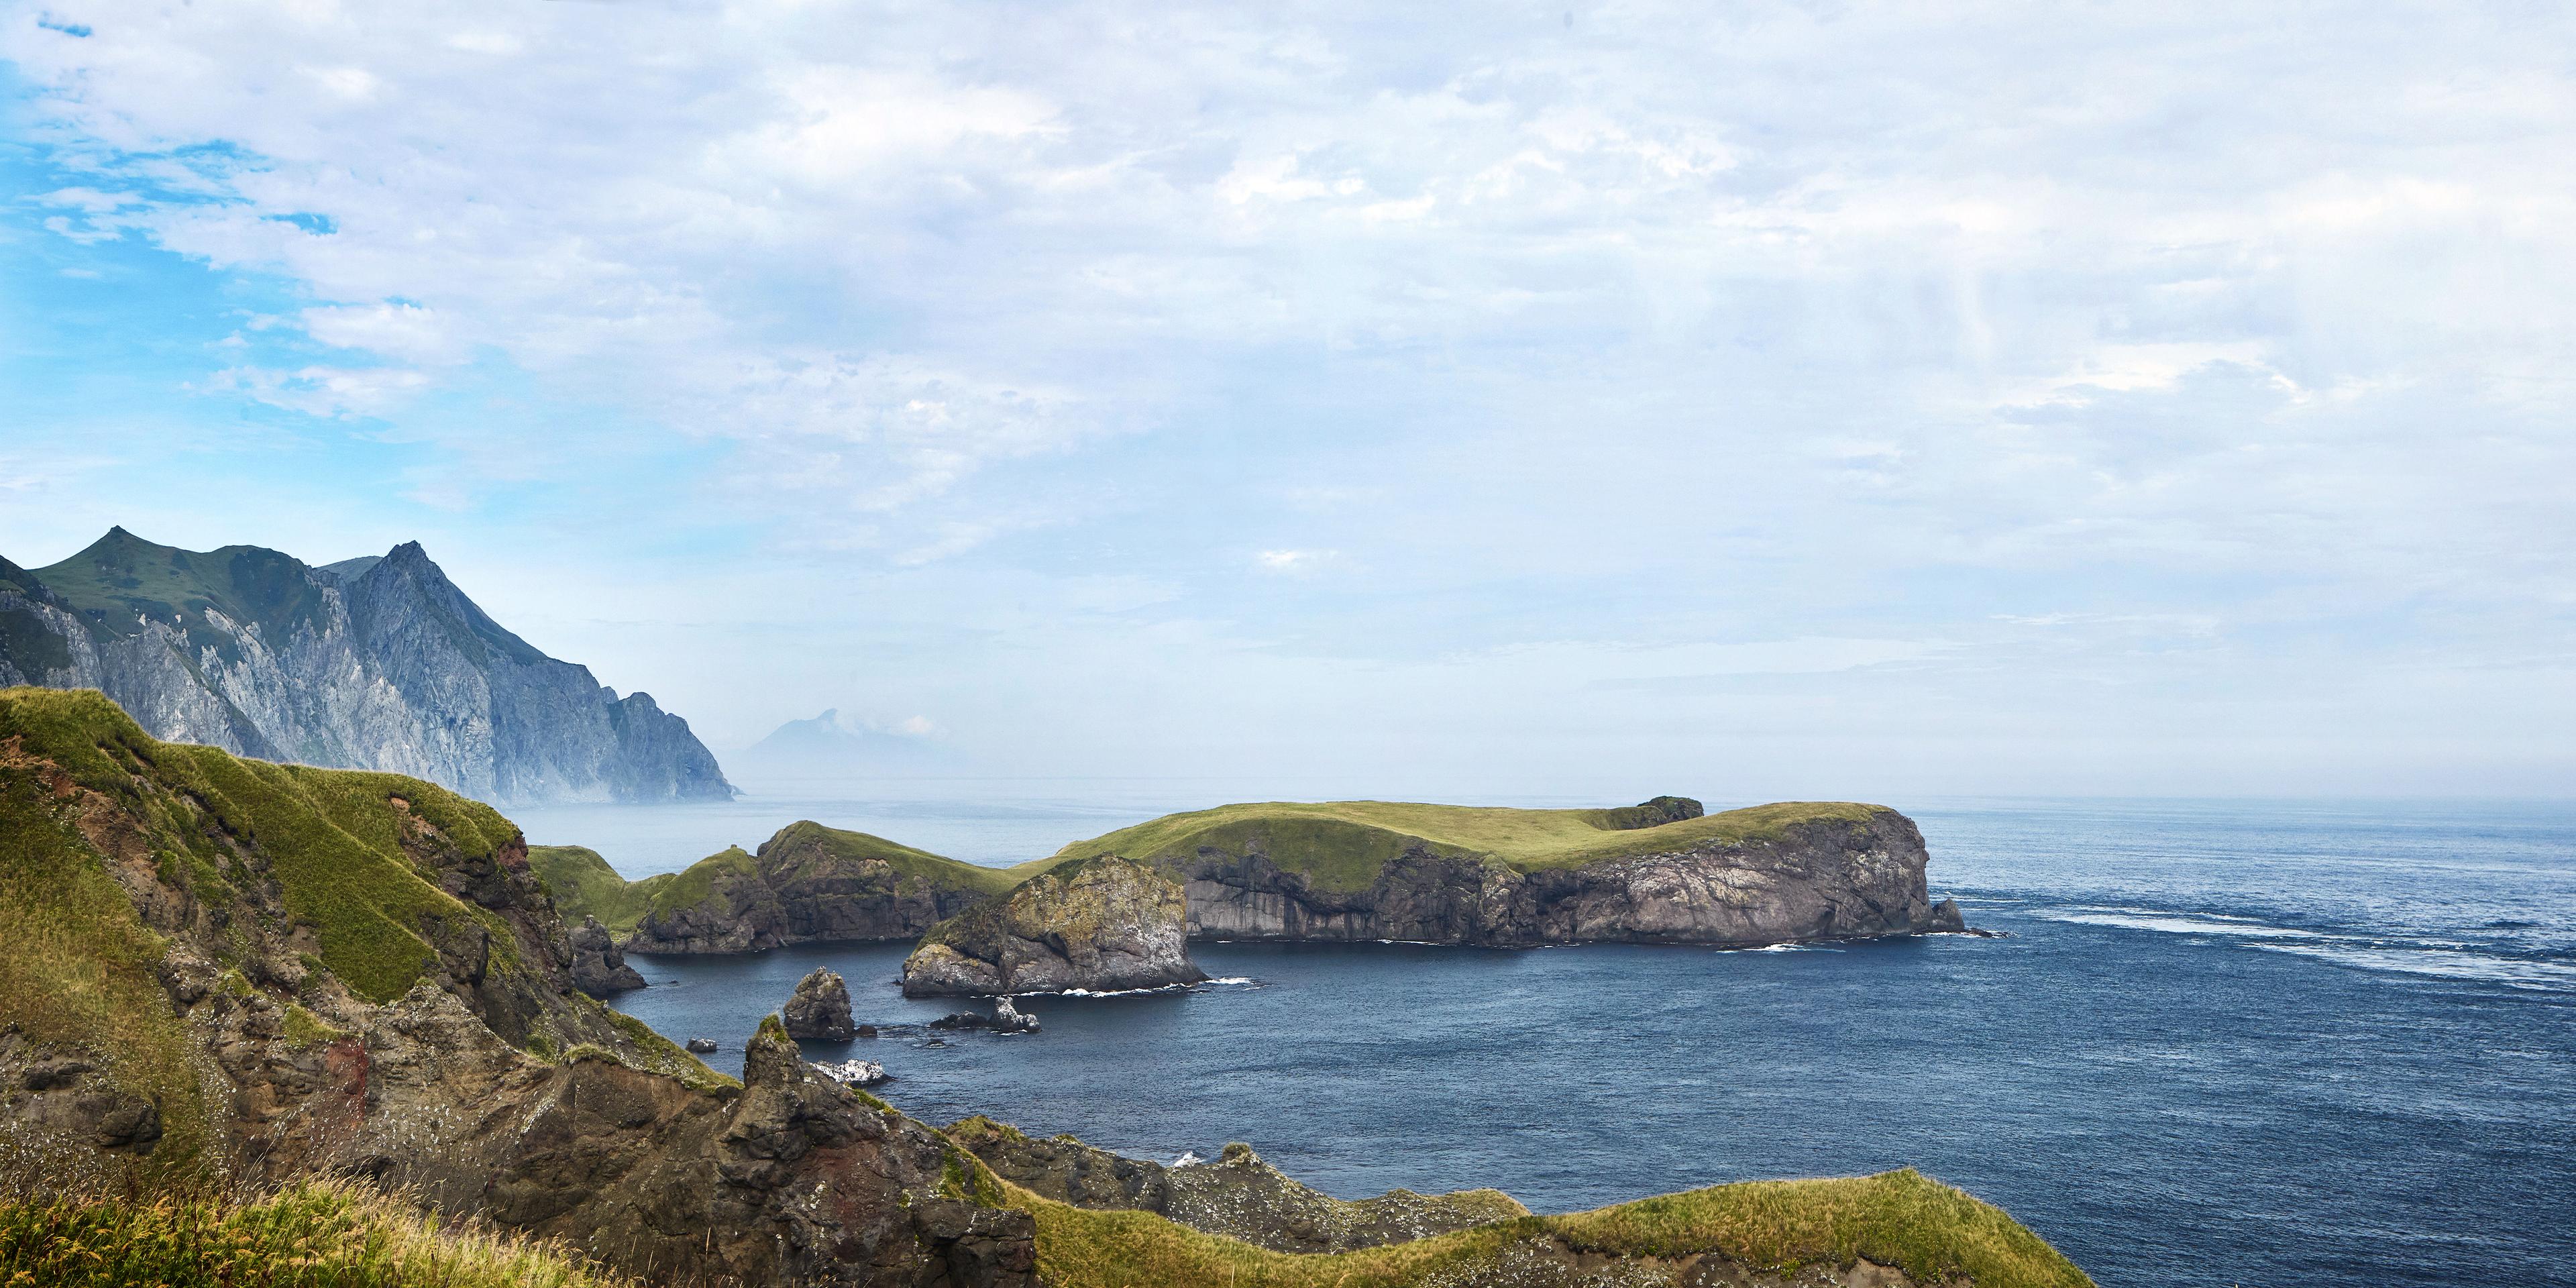 5 Things You Didn’t Know About the Kuril Islands